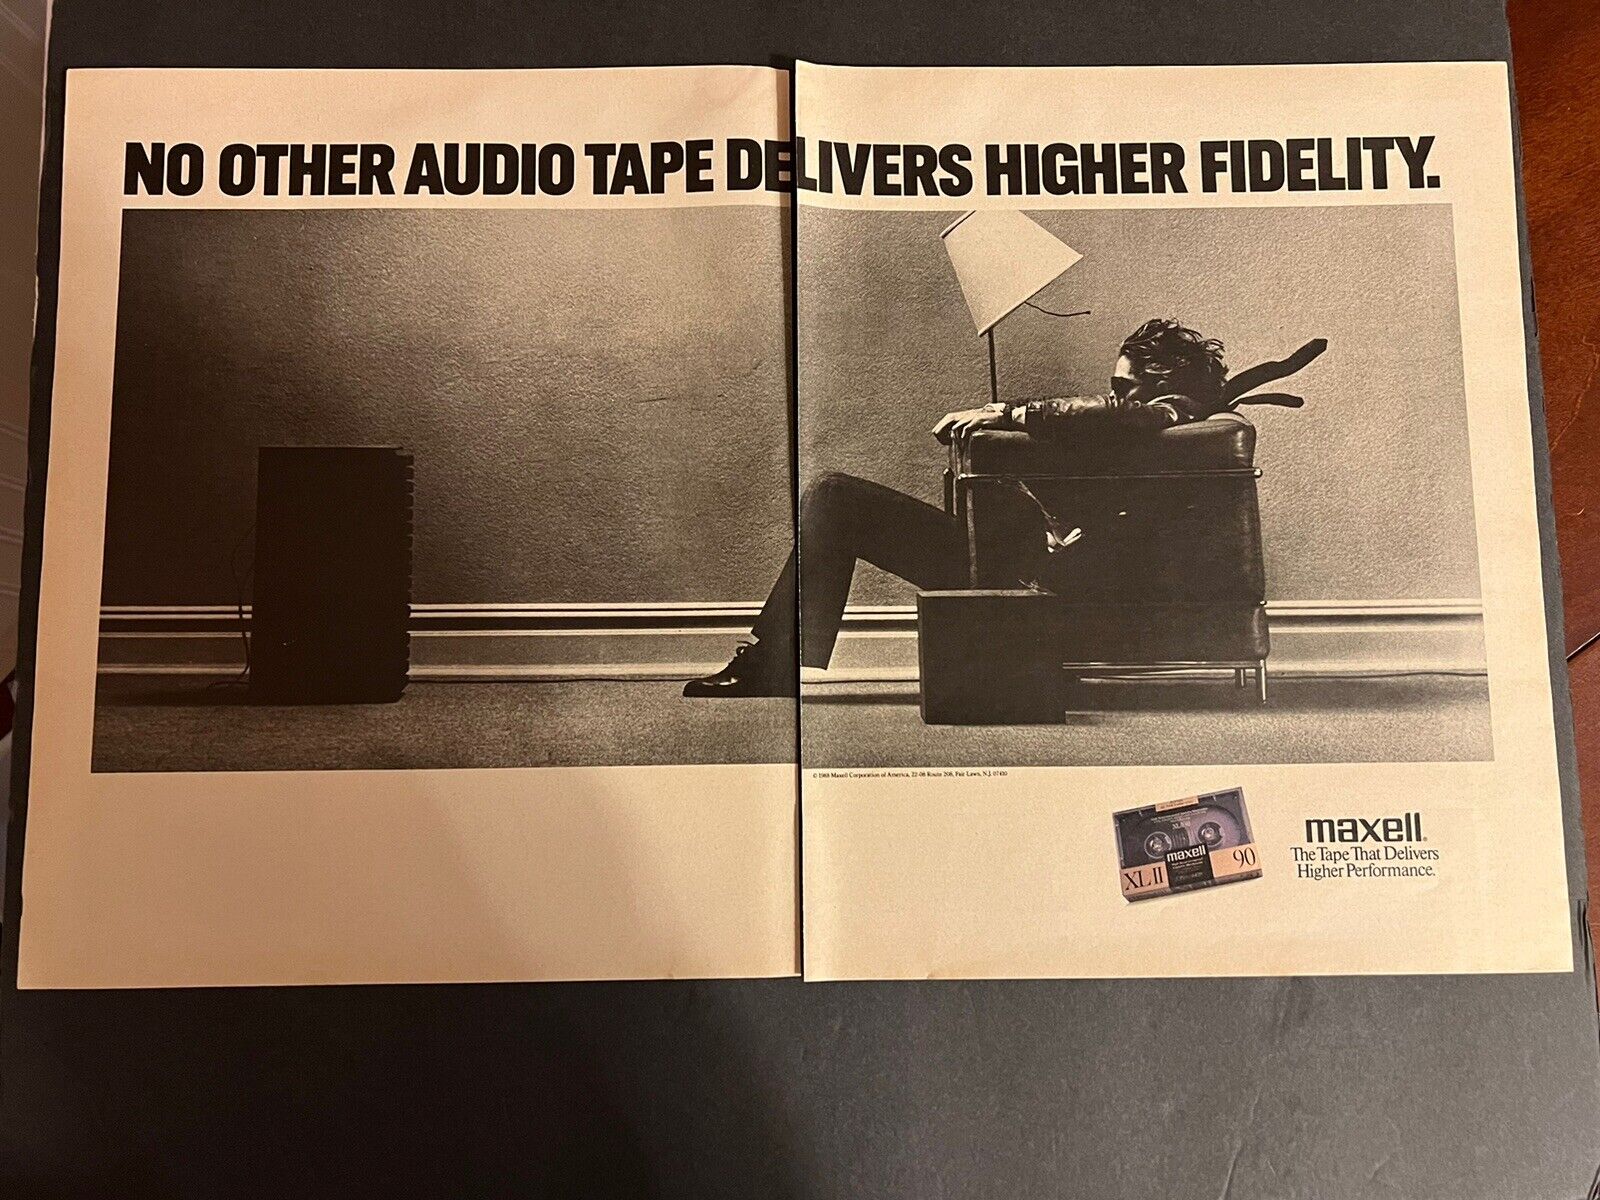 Vtg 1990s 2 page Iconic Maxell High Fidelity Ad, Blown Away